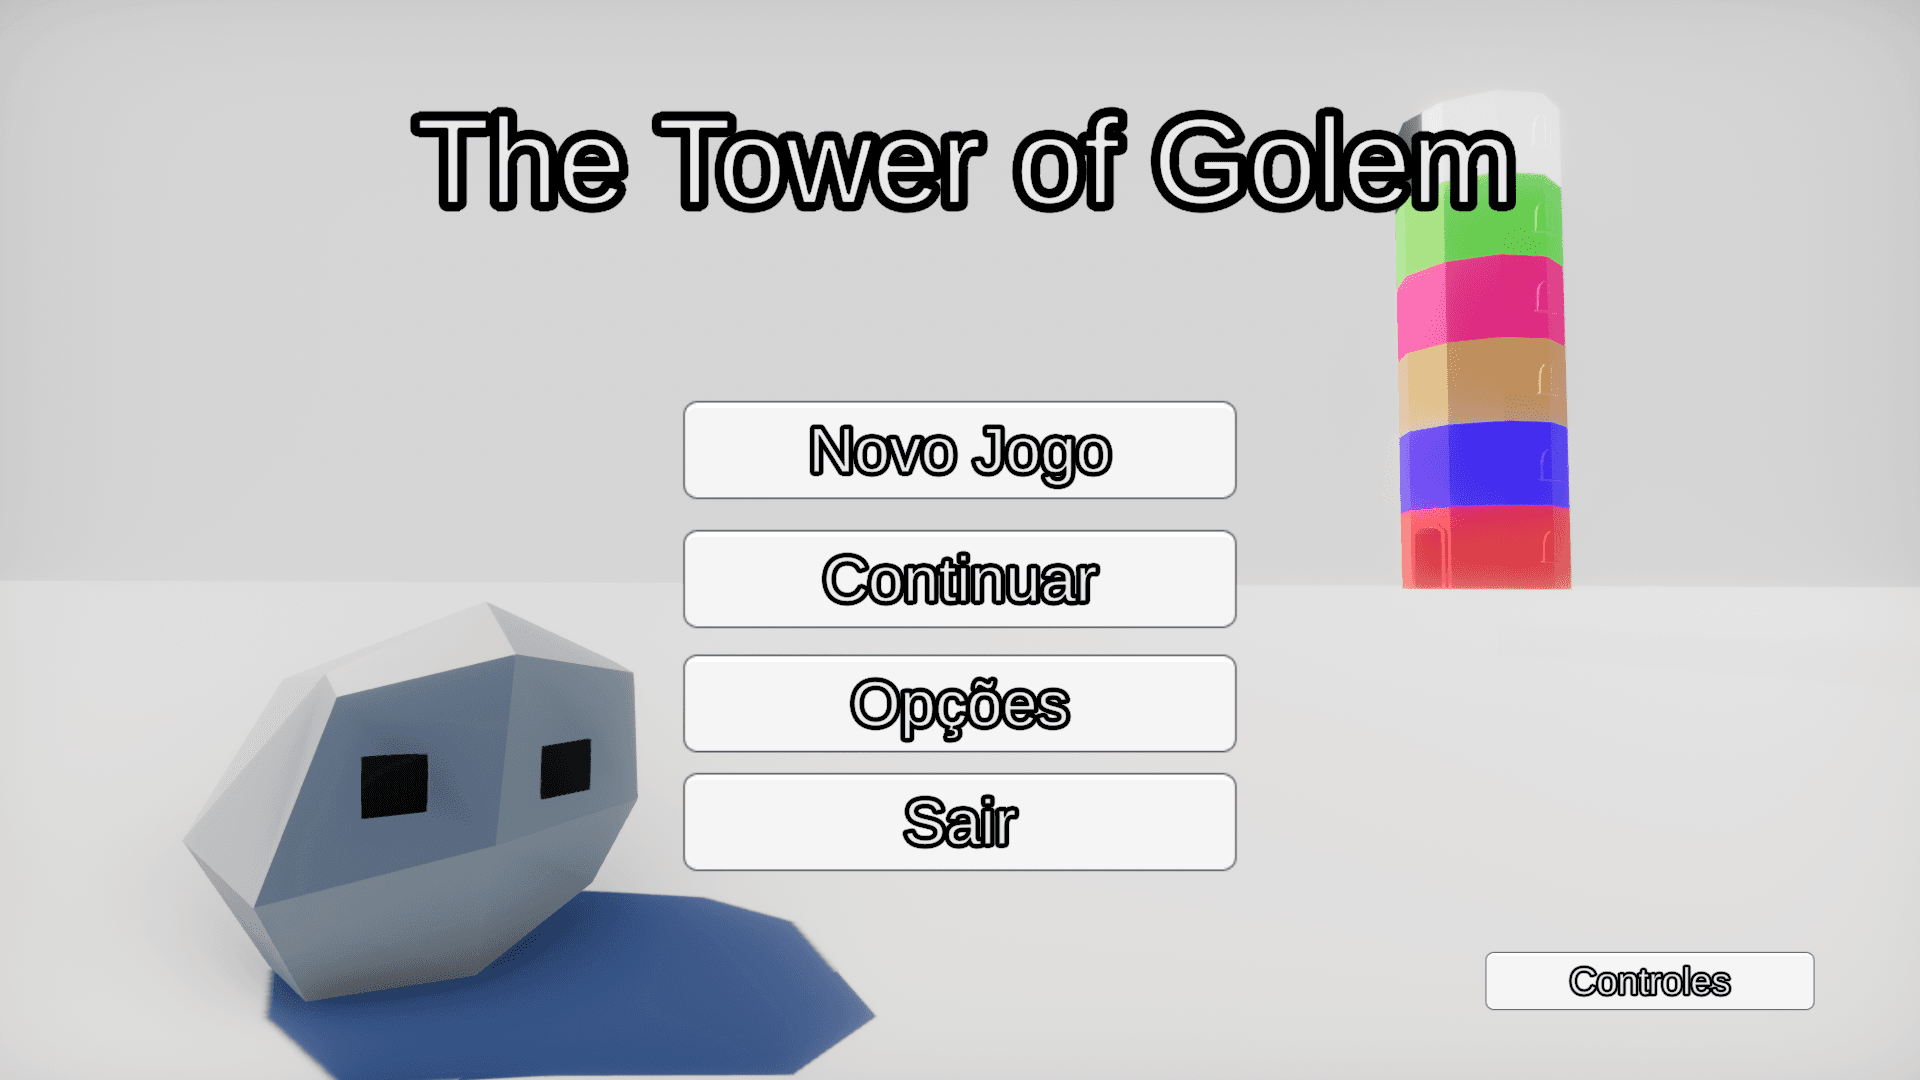 The Tower of Golem